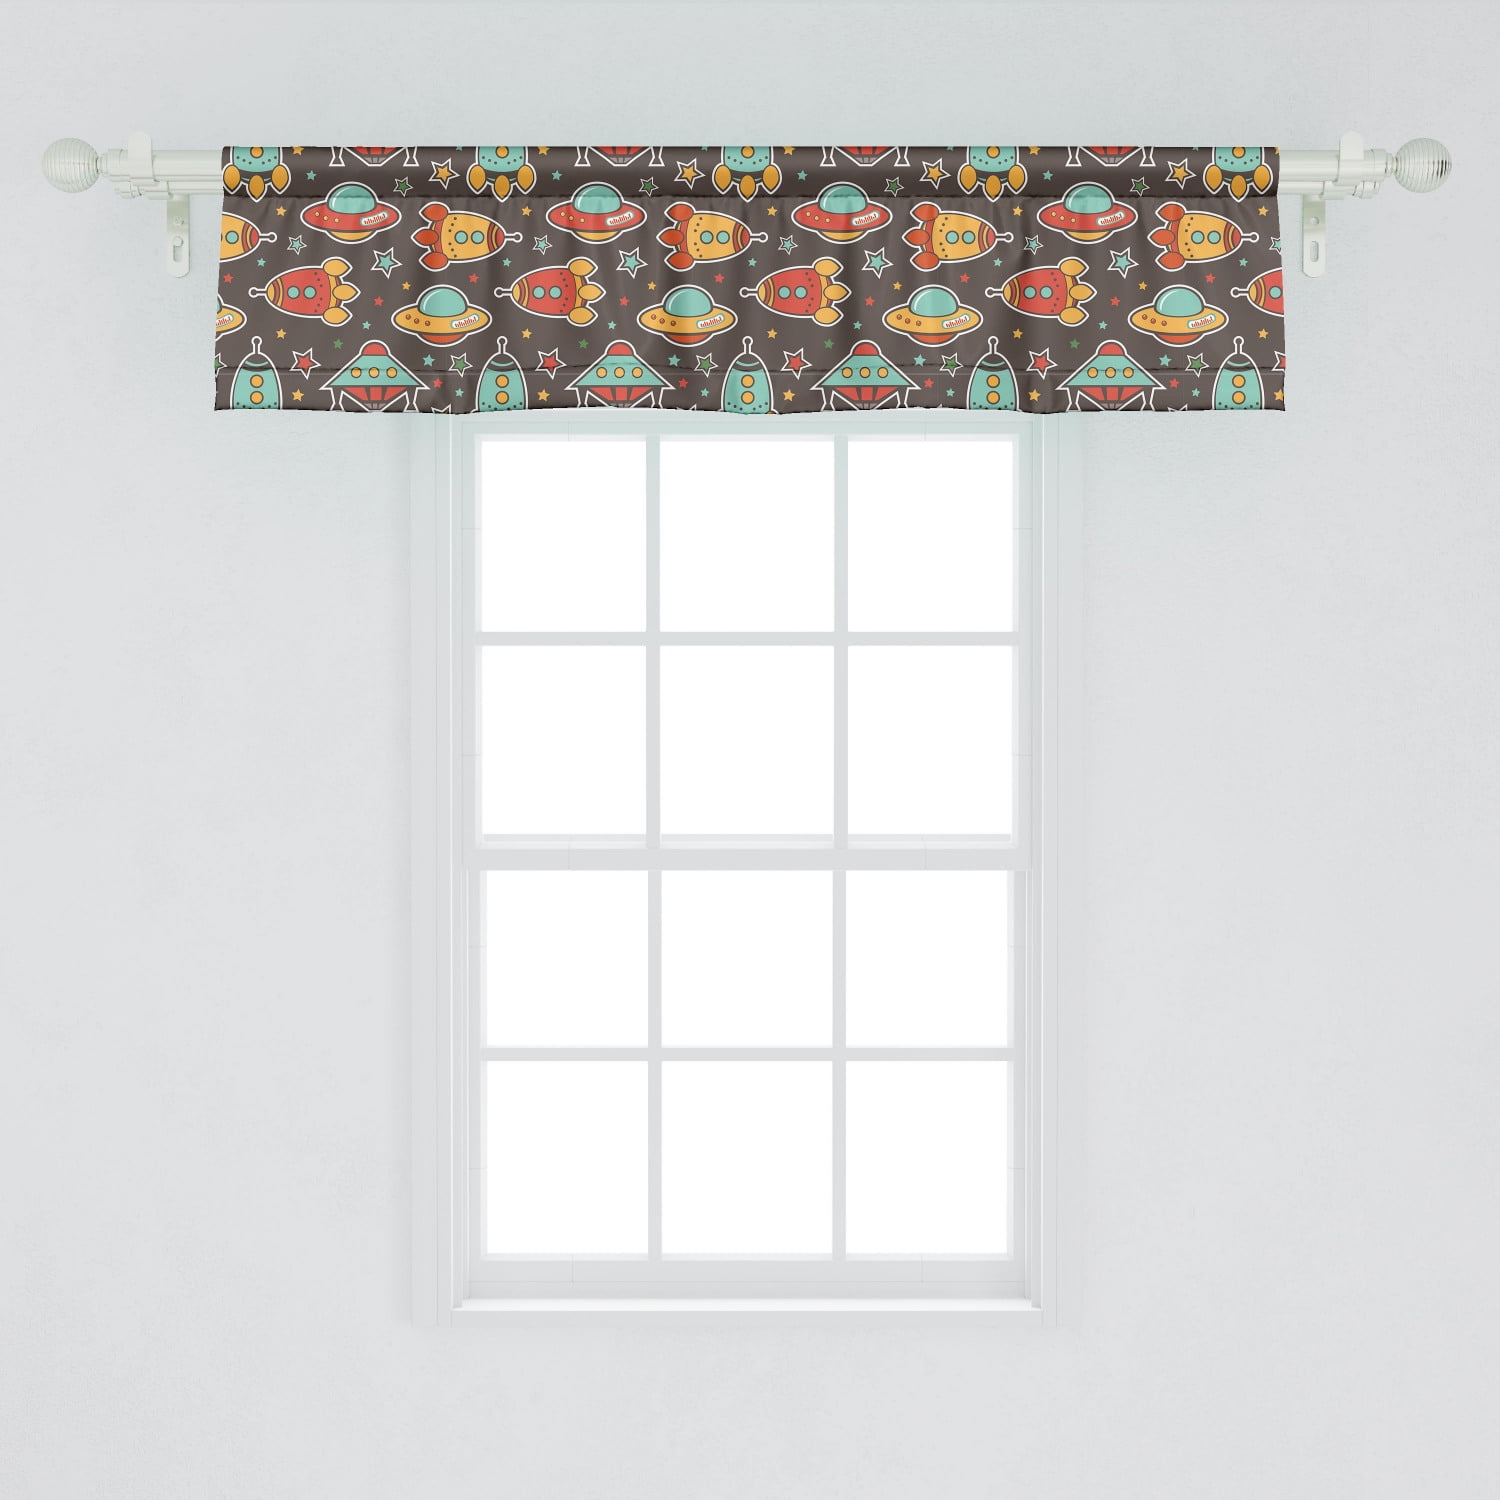 Details about   Any Room Window Valance Nickelodeon Mainstay Disney You Pick X Games 